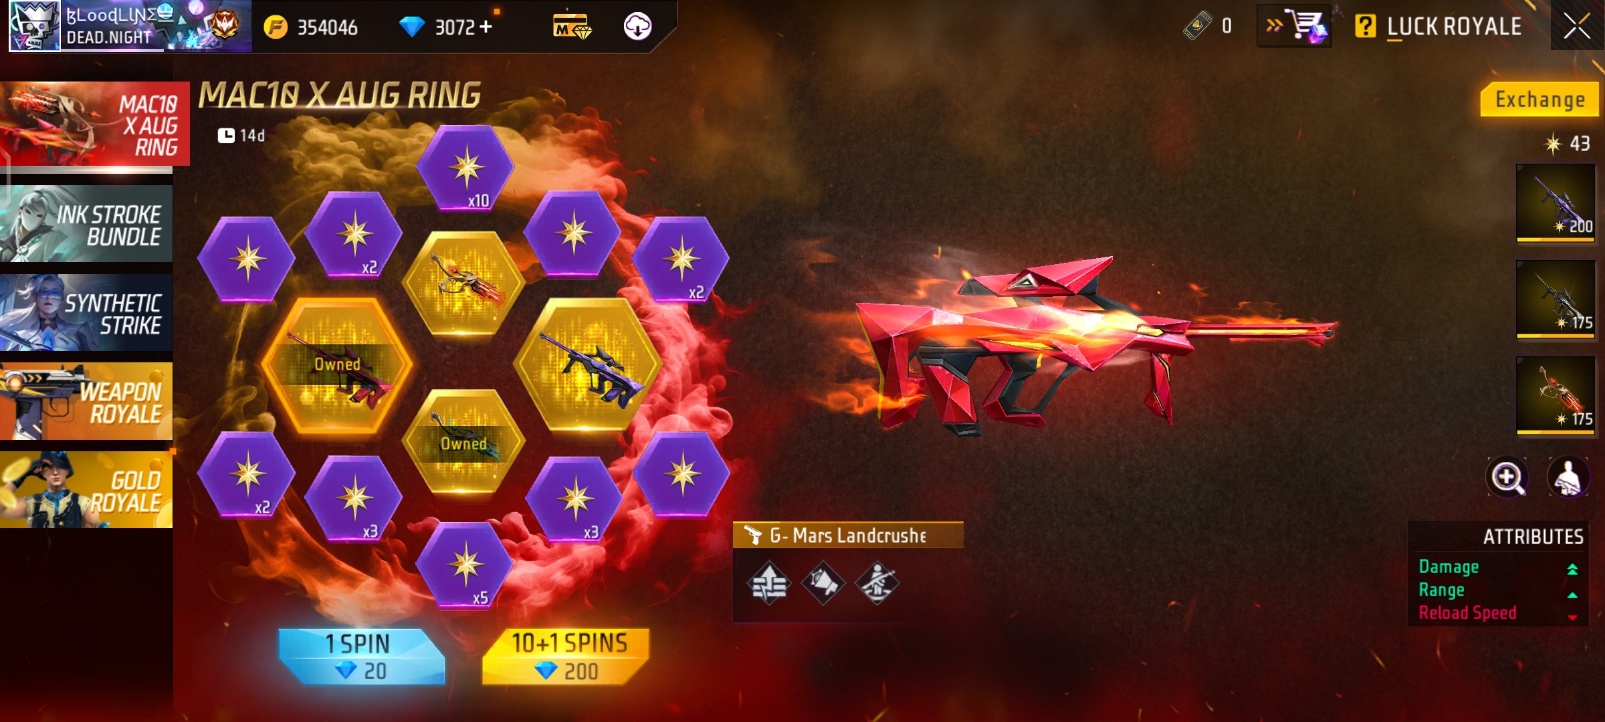 New Event In Free Fire Max : Mac10 X AUG Ring